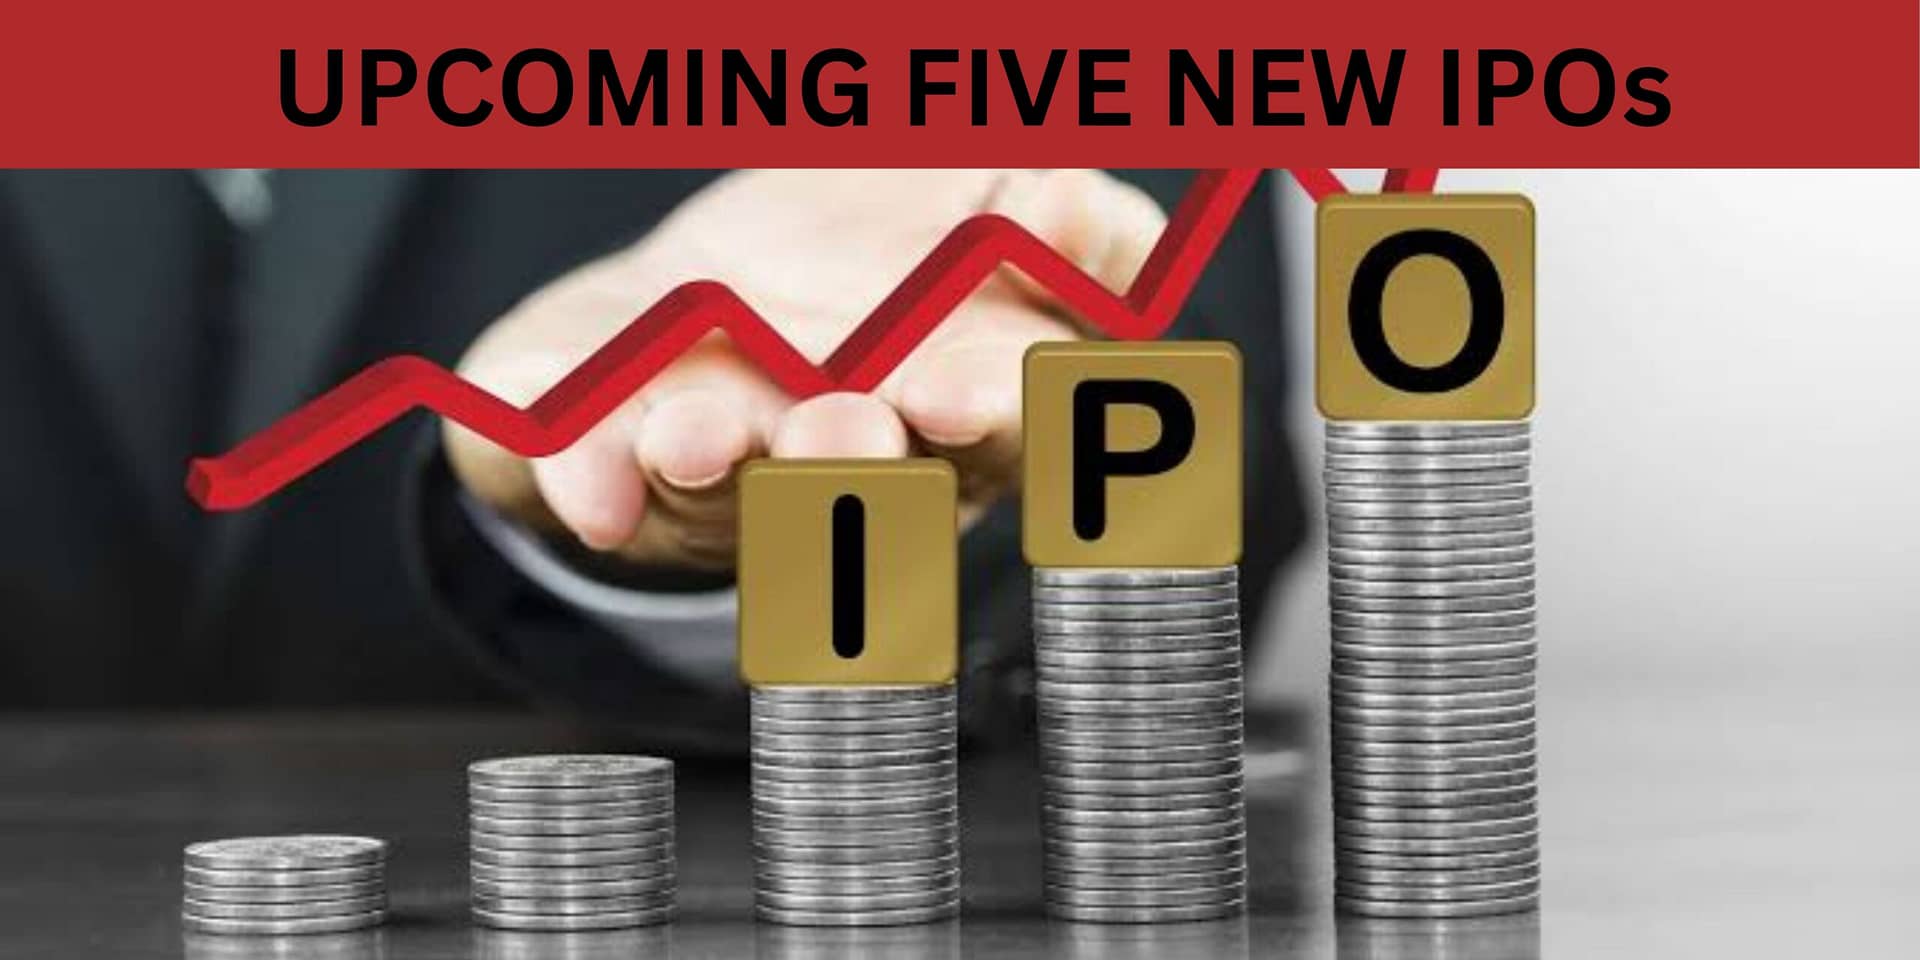 5 New IPOs Check Out The Details